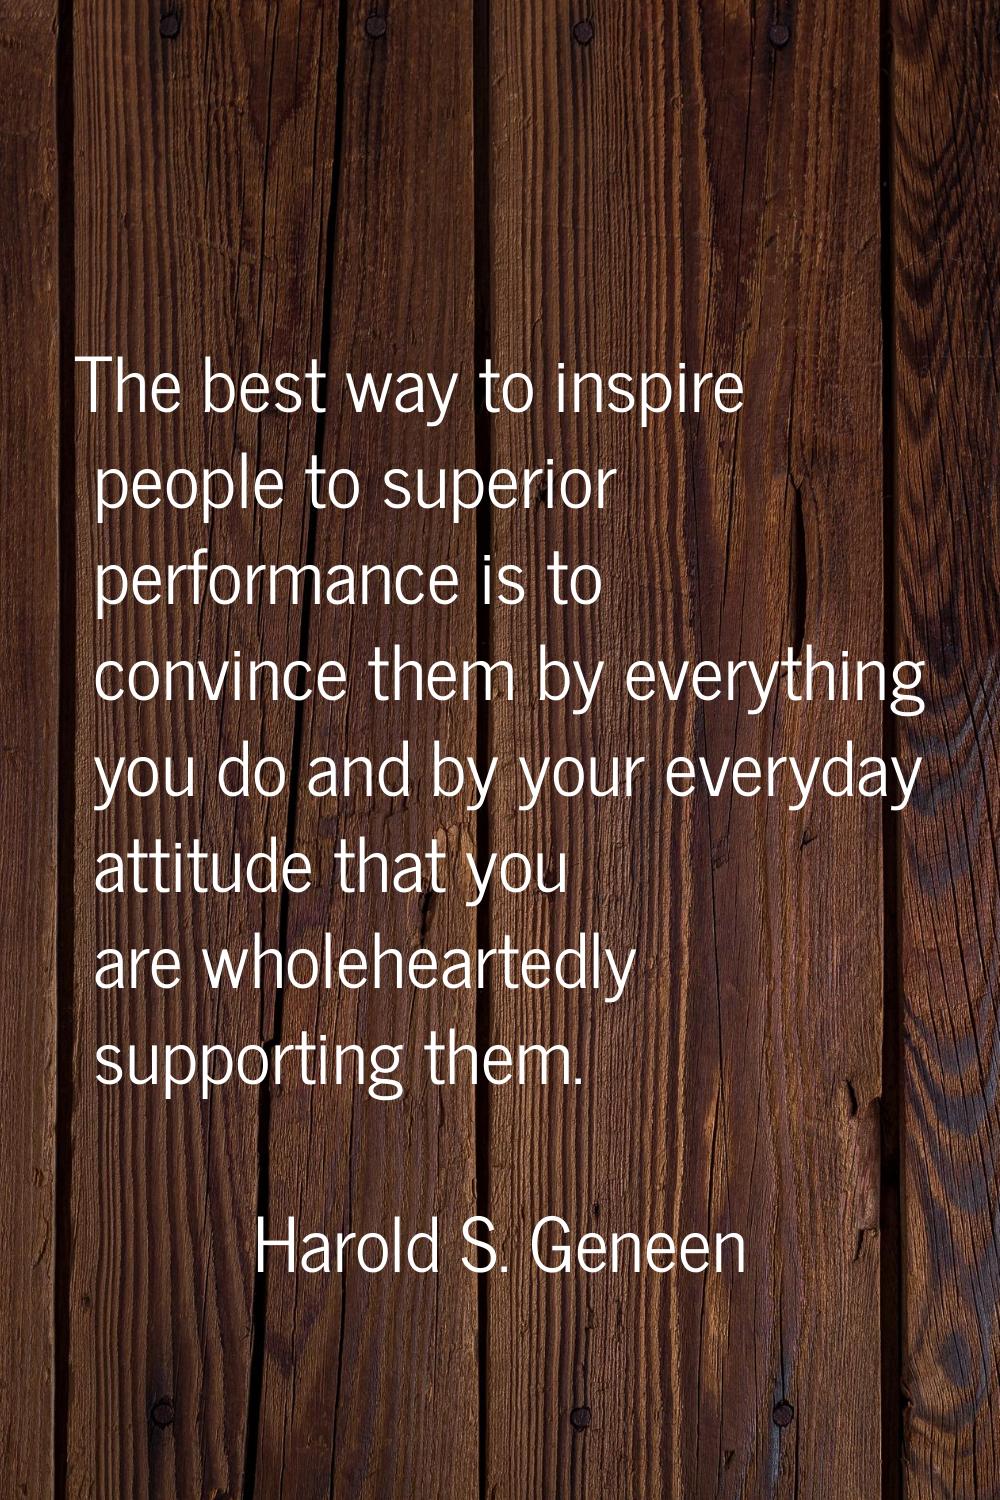 The best way to inspire people to superior performance is to convince them by everything you do and